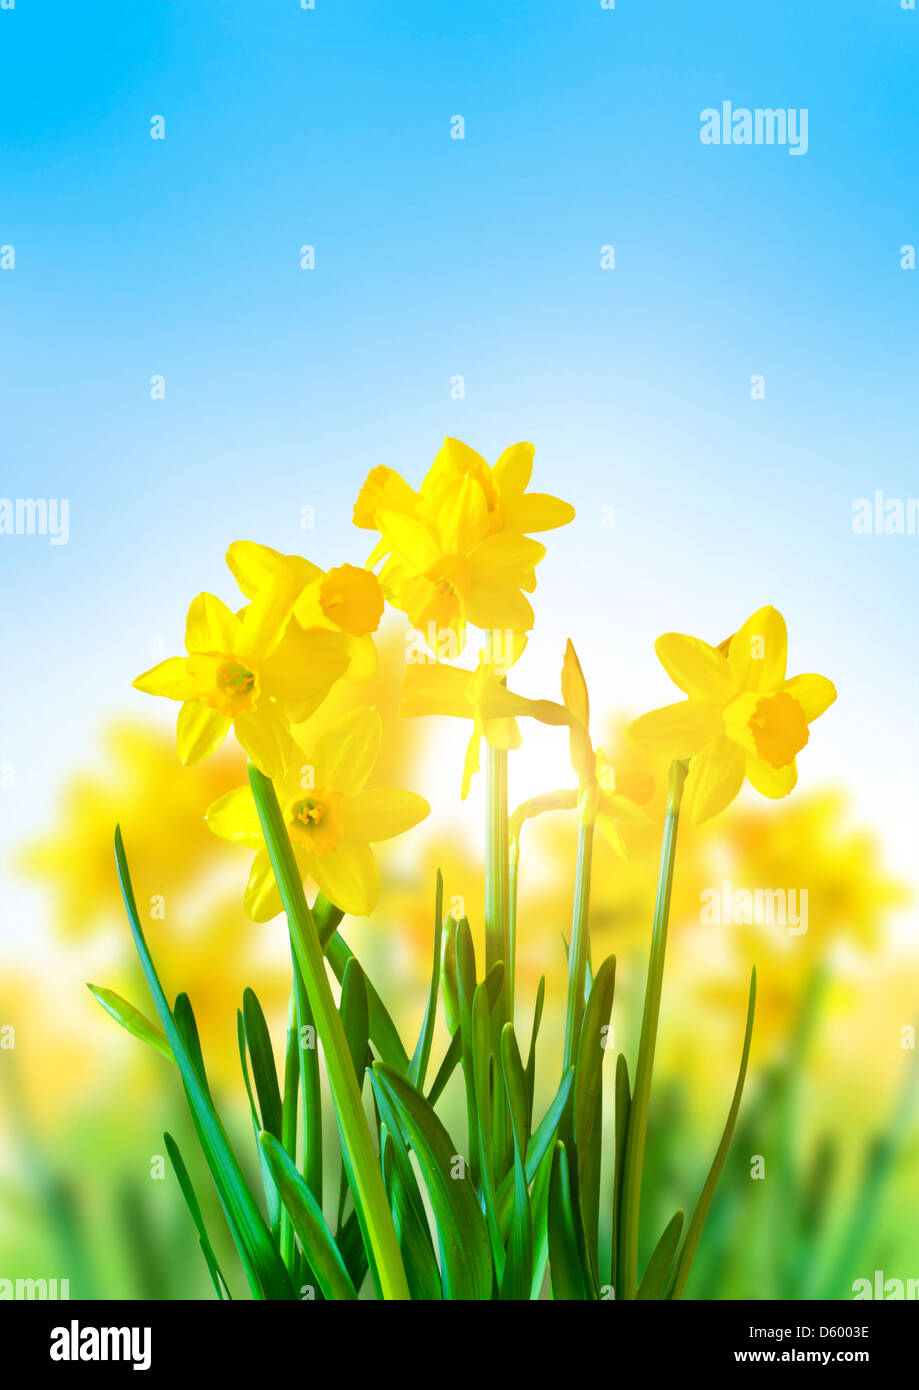 Spring Daffodils on a bright blue sky. Stock Photo